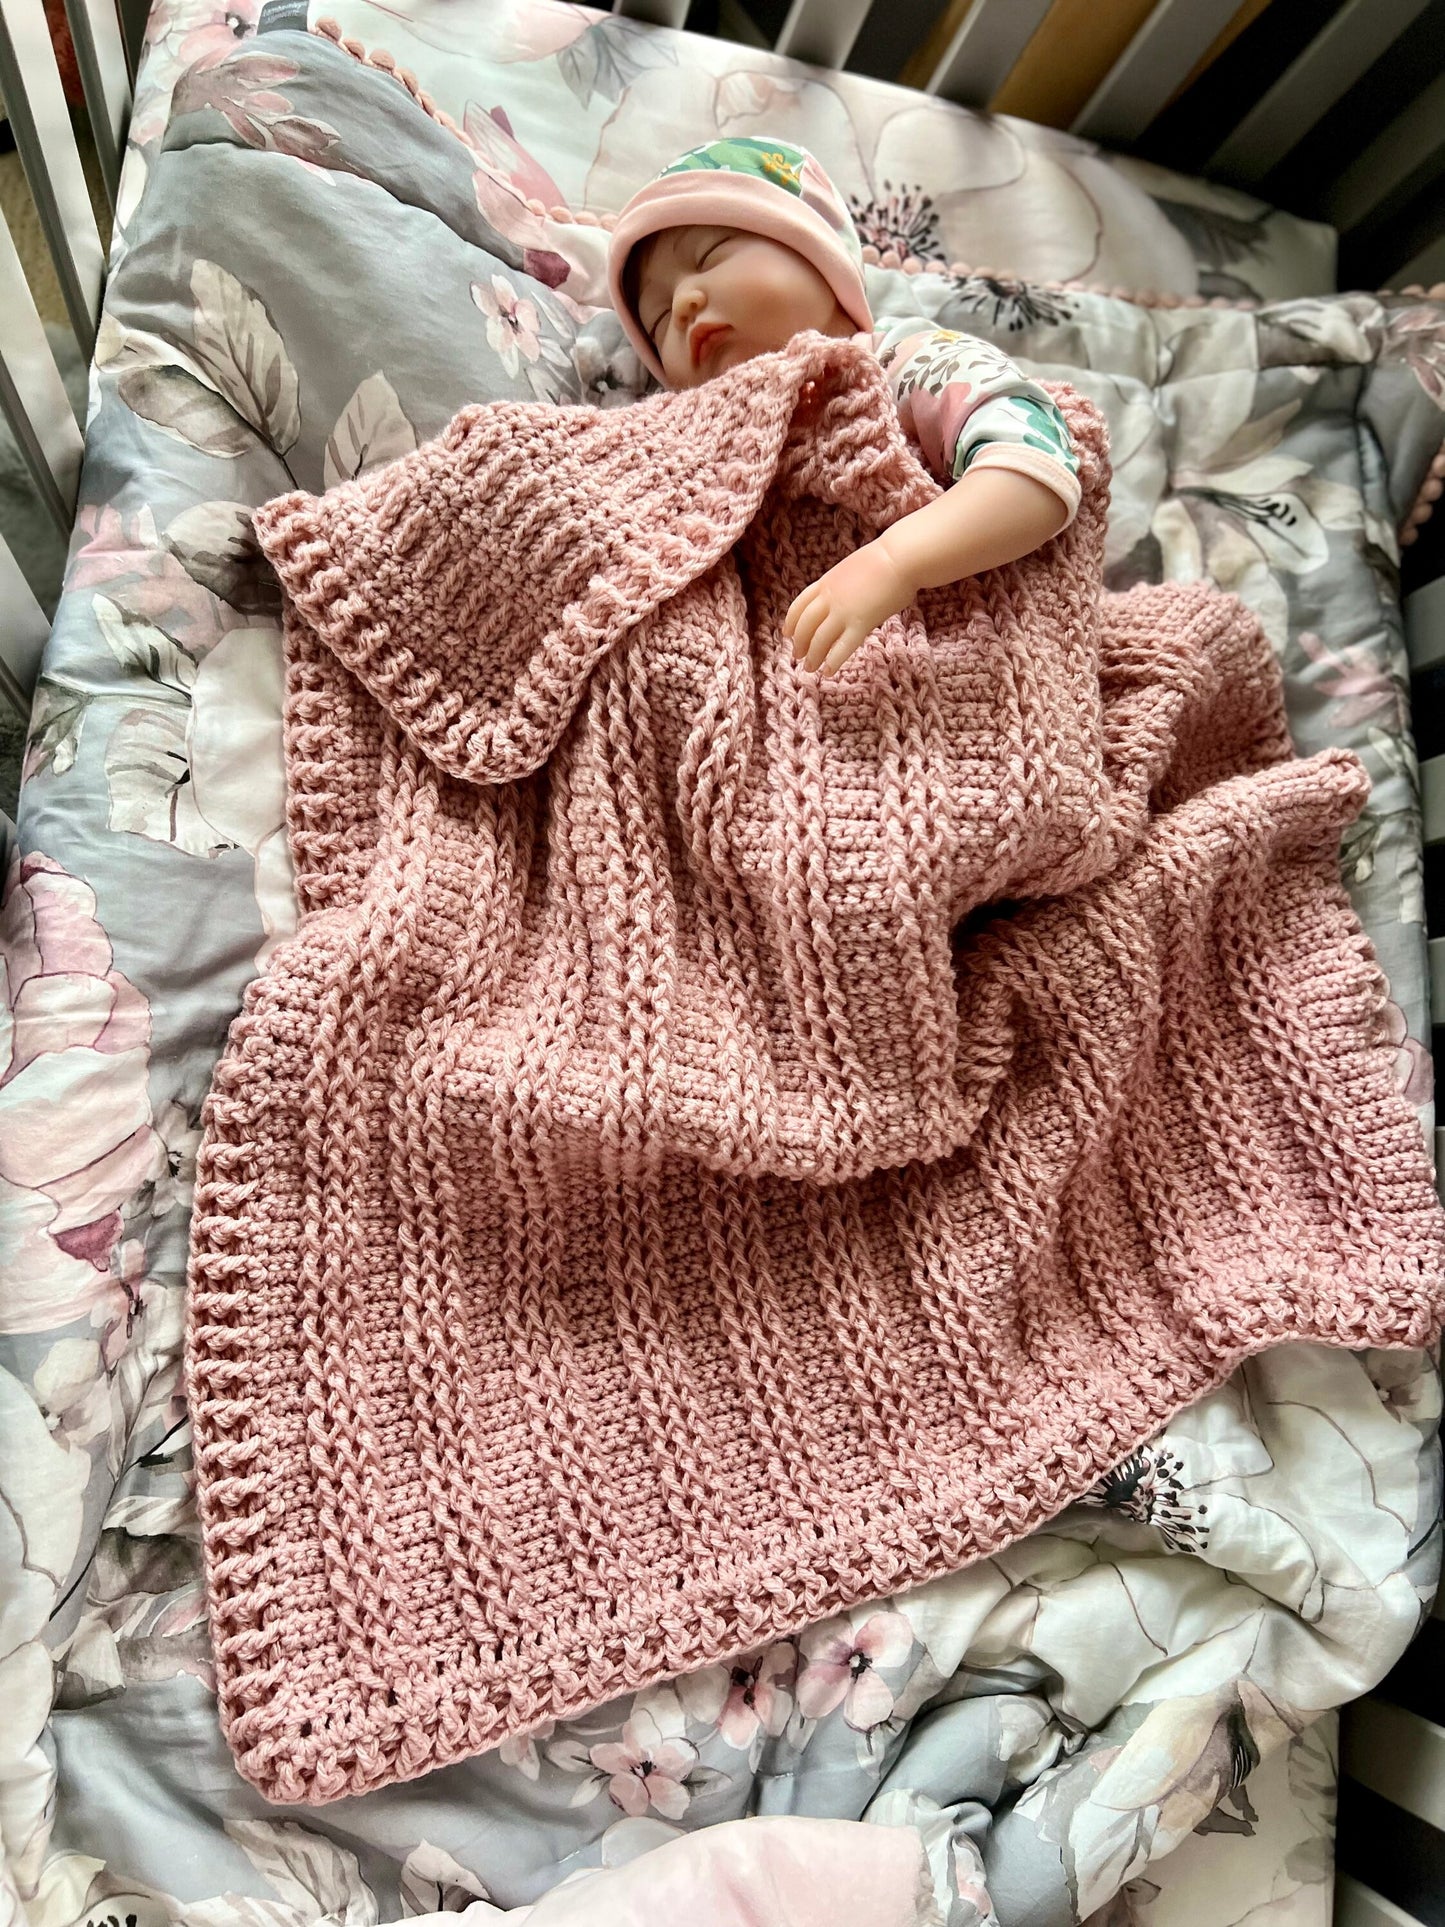 Handmade crochet blanket for baby girl, pink - Lilly Grace Sparkle Boutique